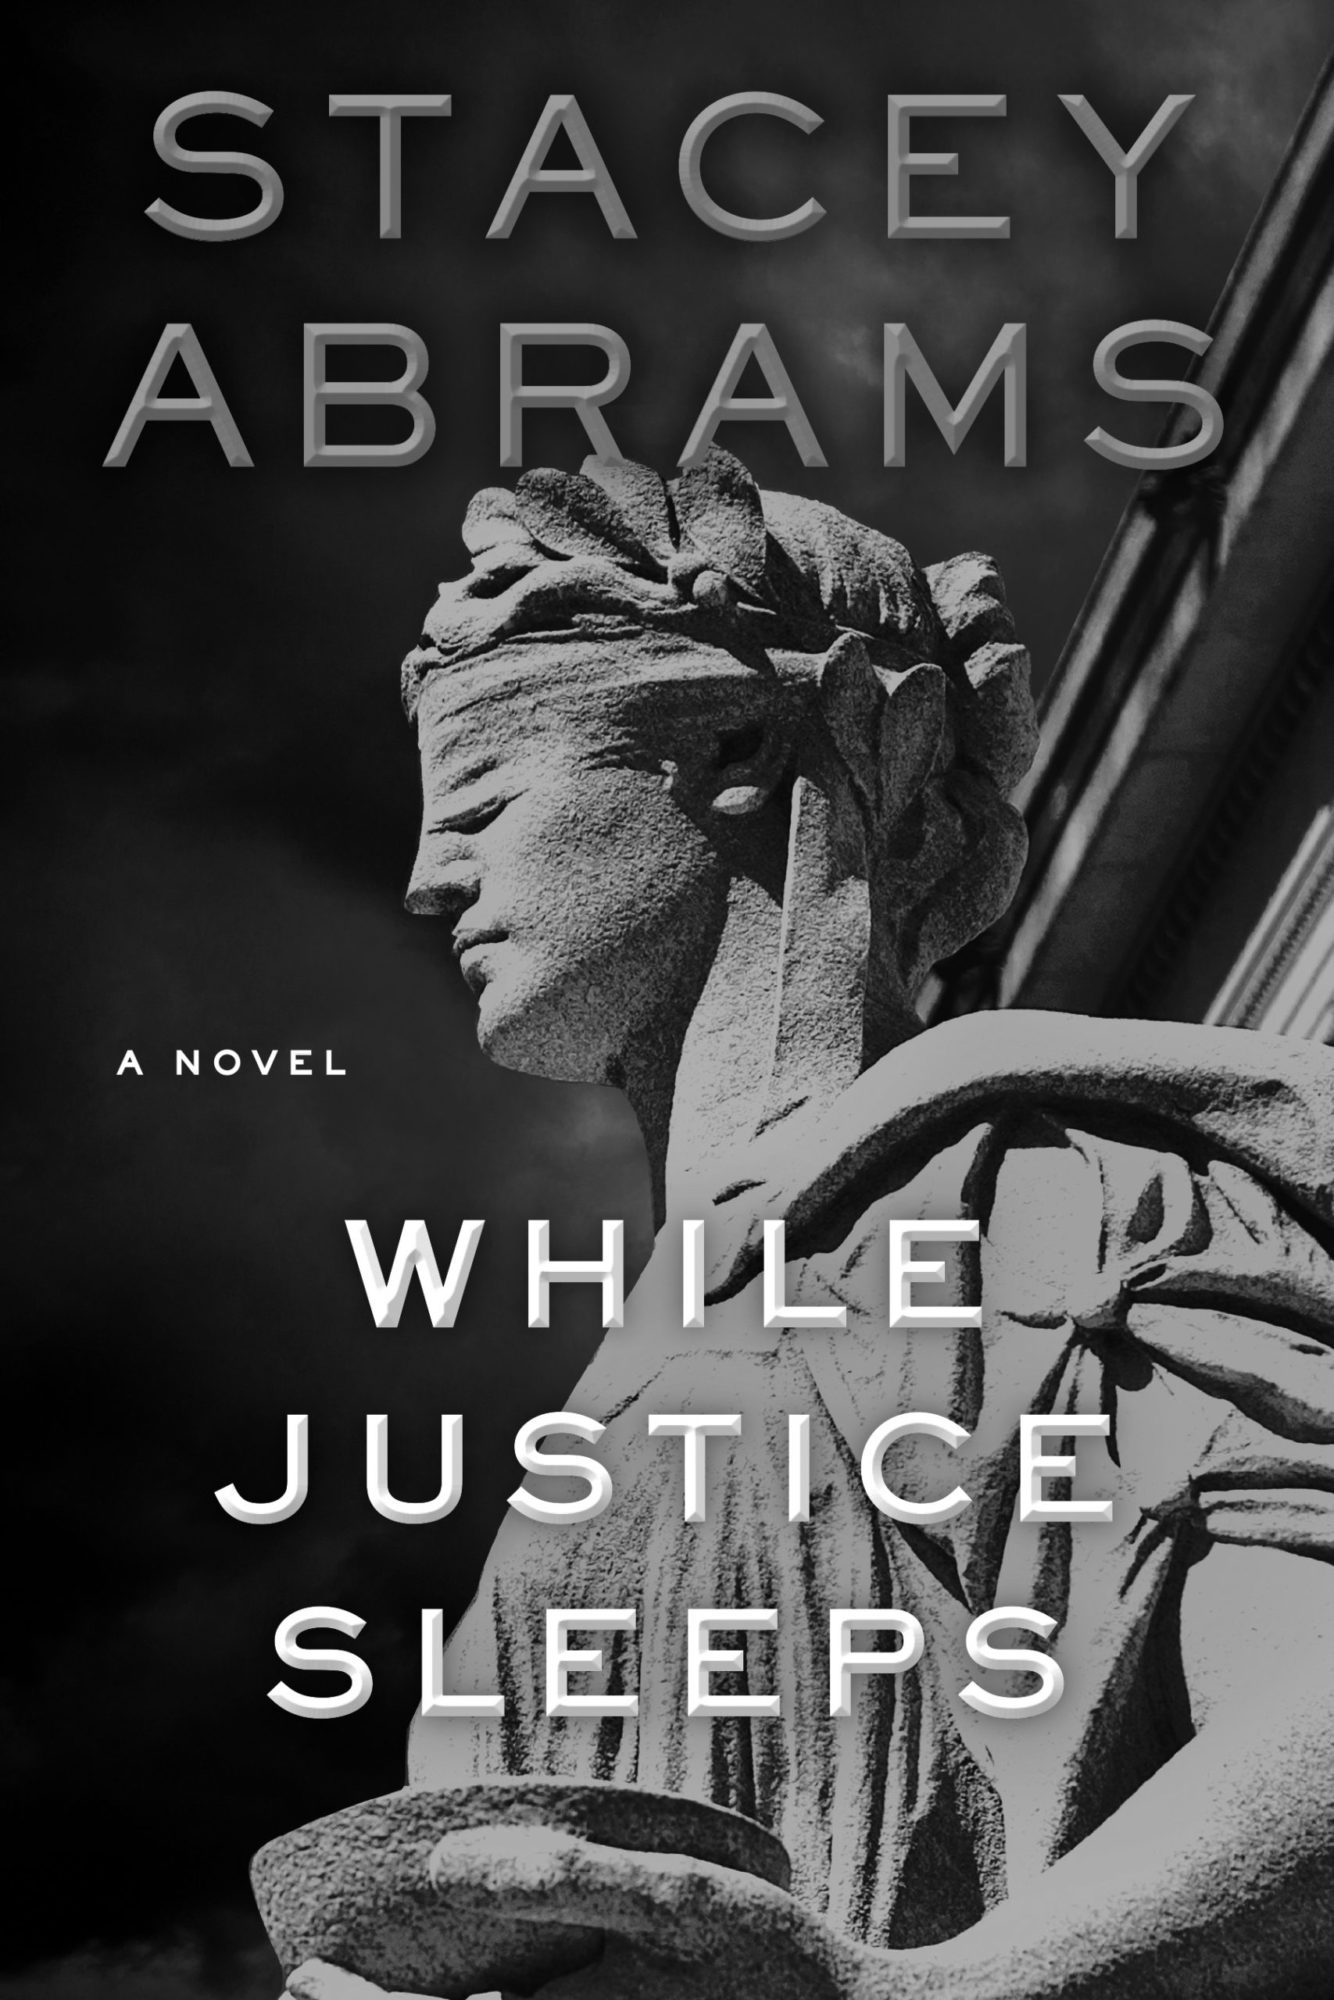 Cover of Stacey Abrams new novel, While Justice Sleeps. The cover features a statue with its eyes covered by cloth.